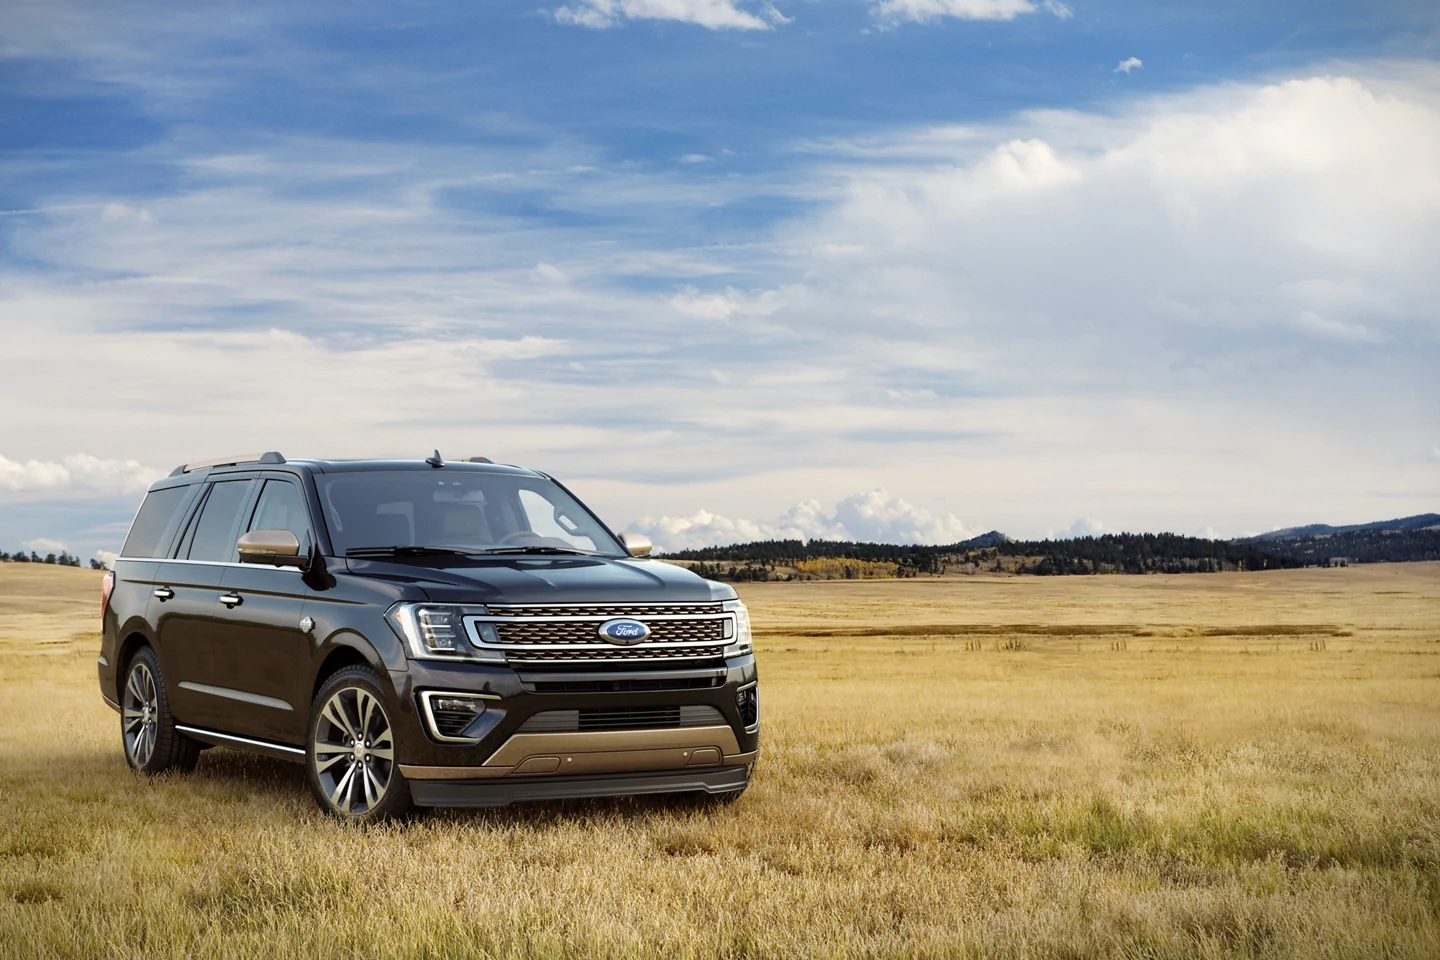 2021 Ford Expedition Lease near Dothan, AL